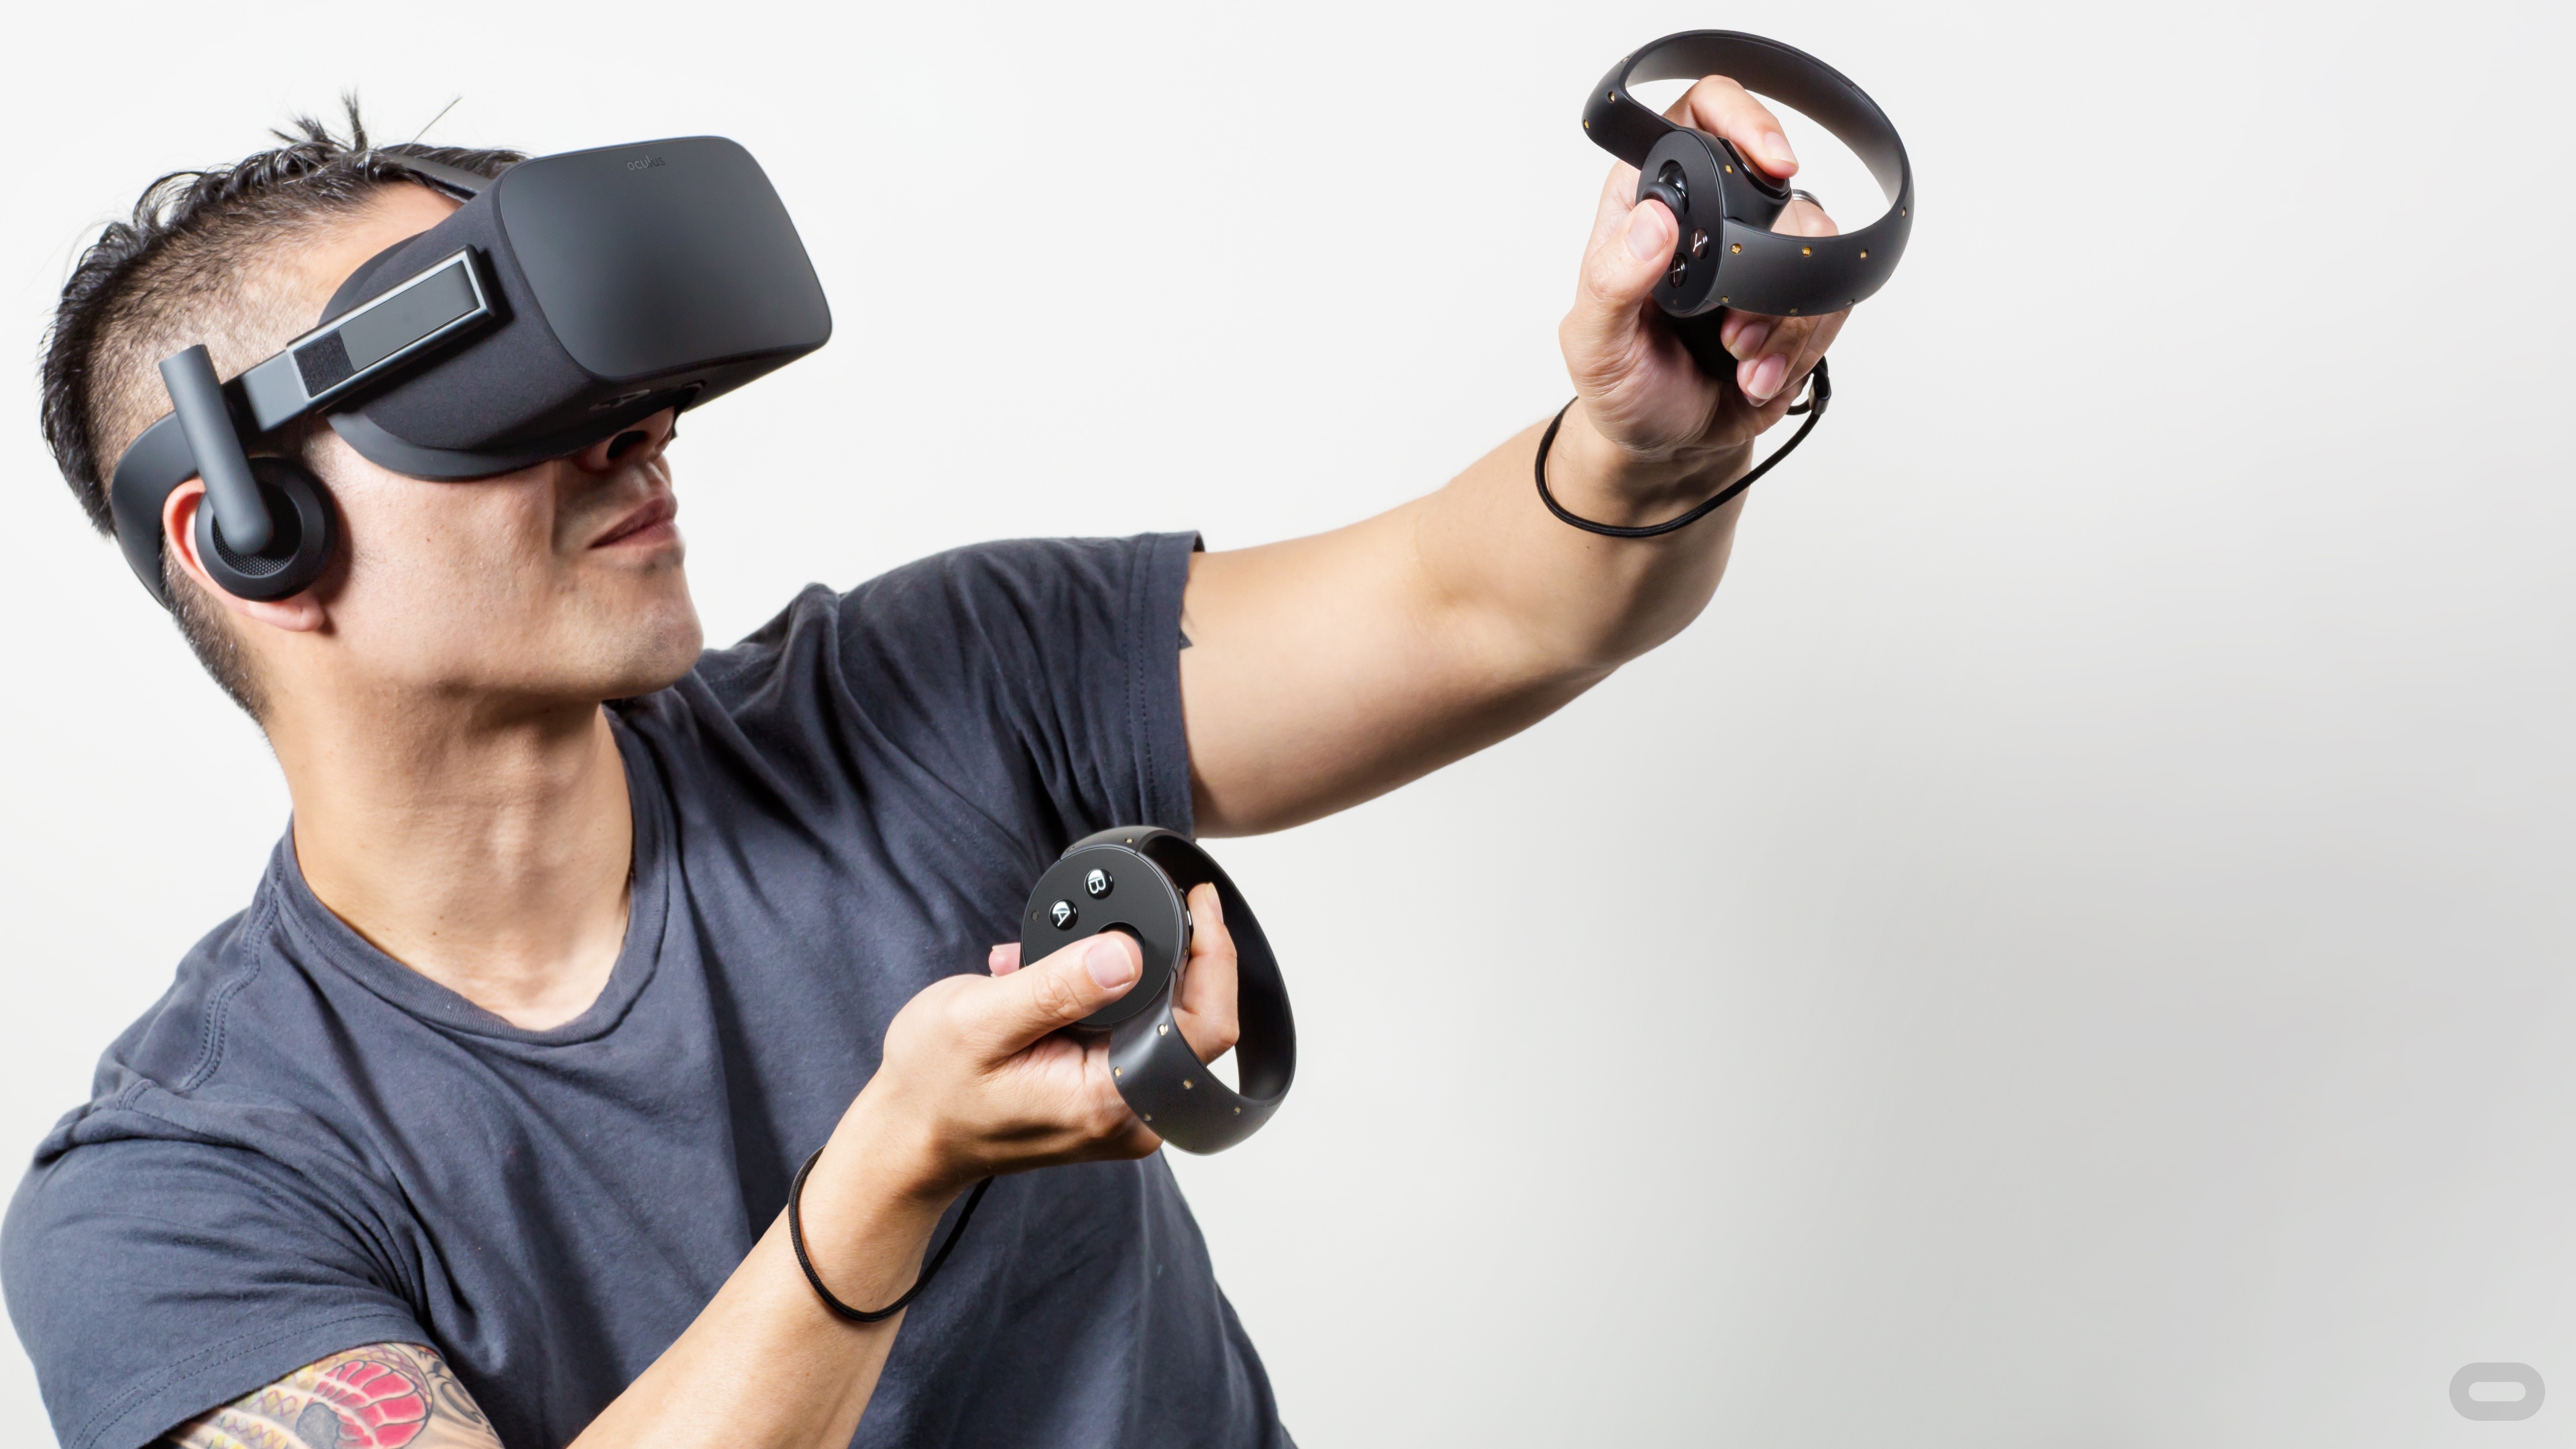 Oculus Announces New Minimum Specifications for Rift – $499 Entry-Level PC